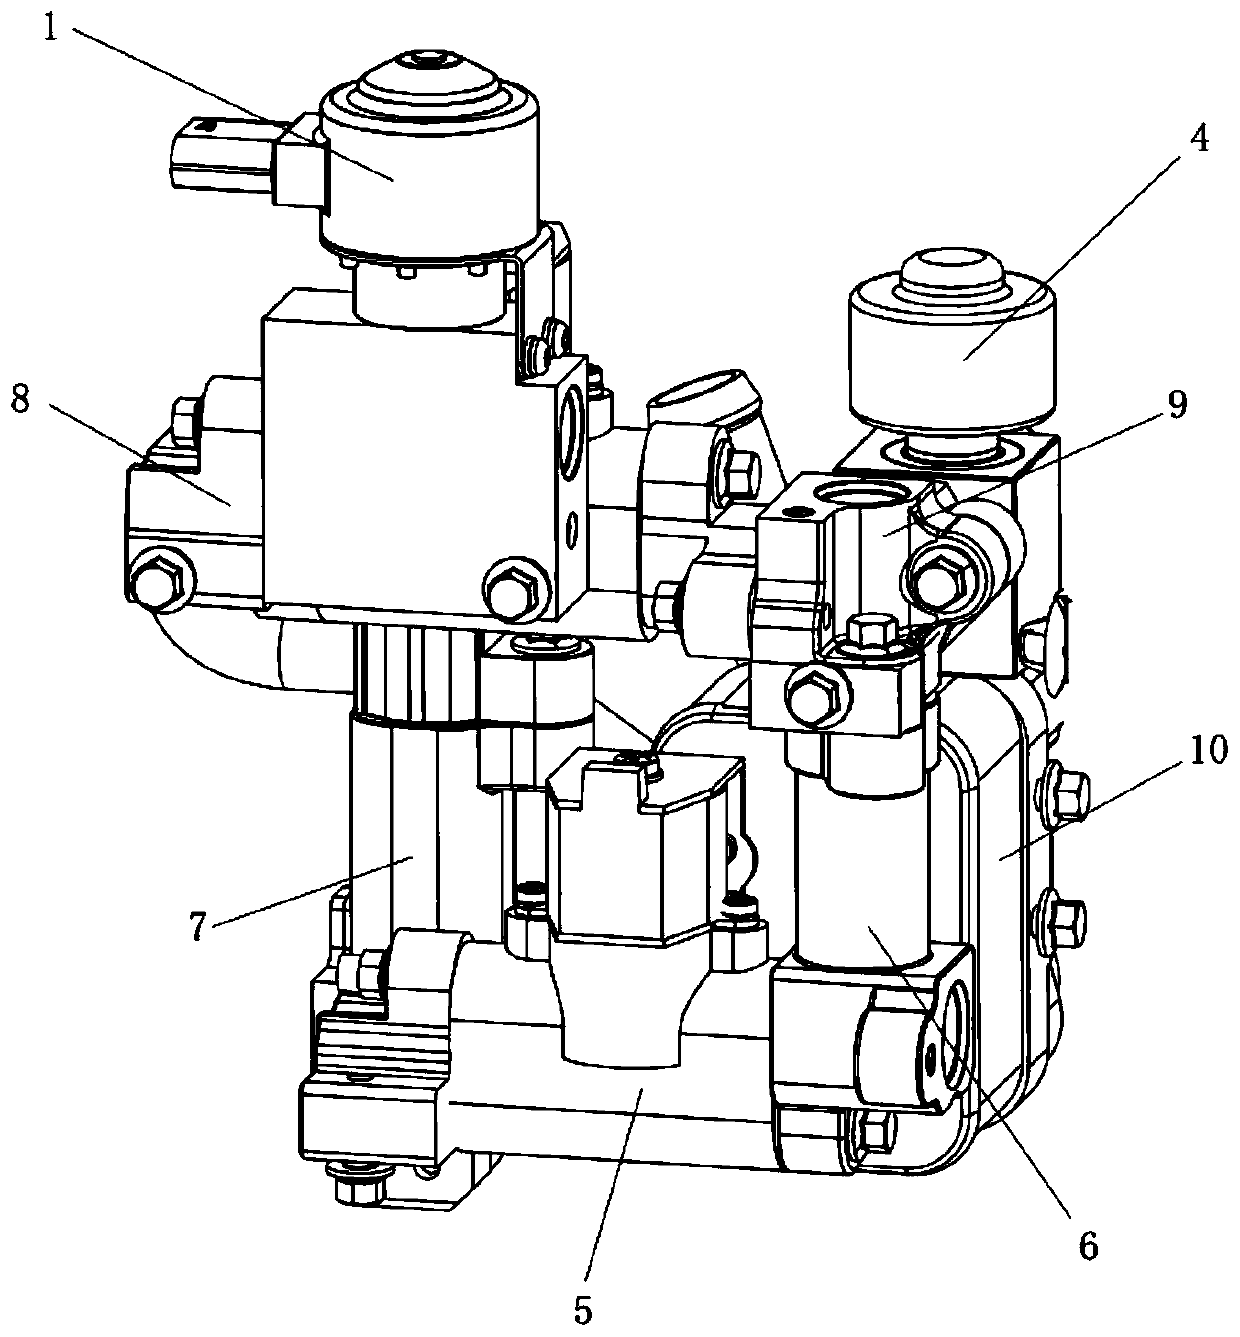 Valve body integrated module and heat pump air-conditioning system